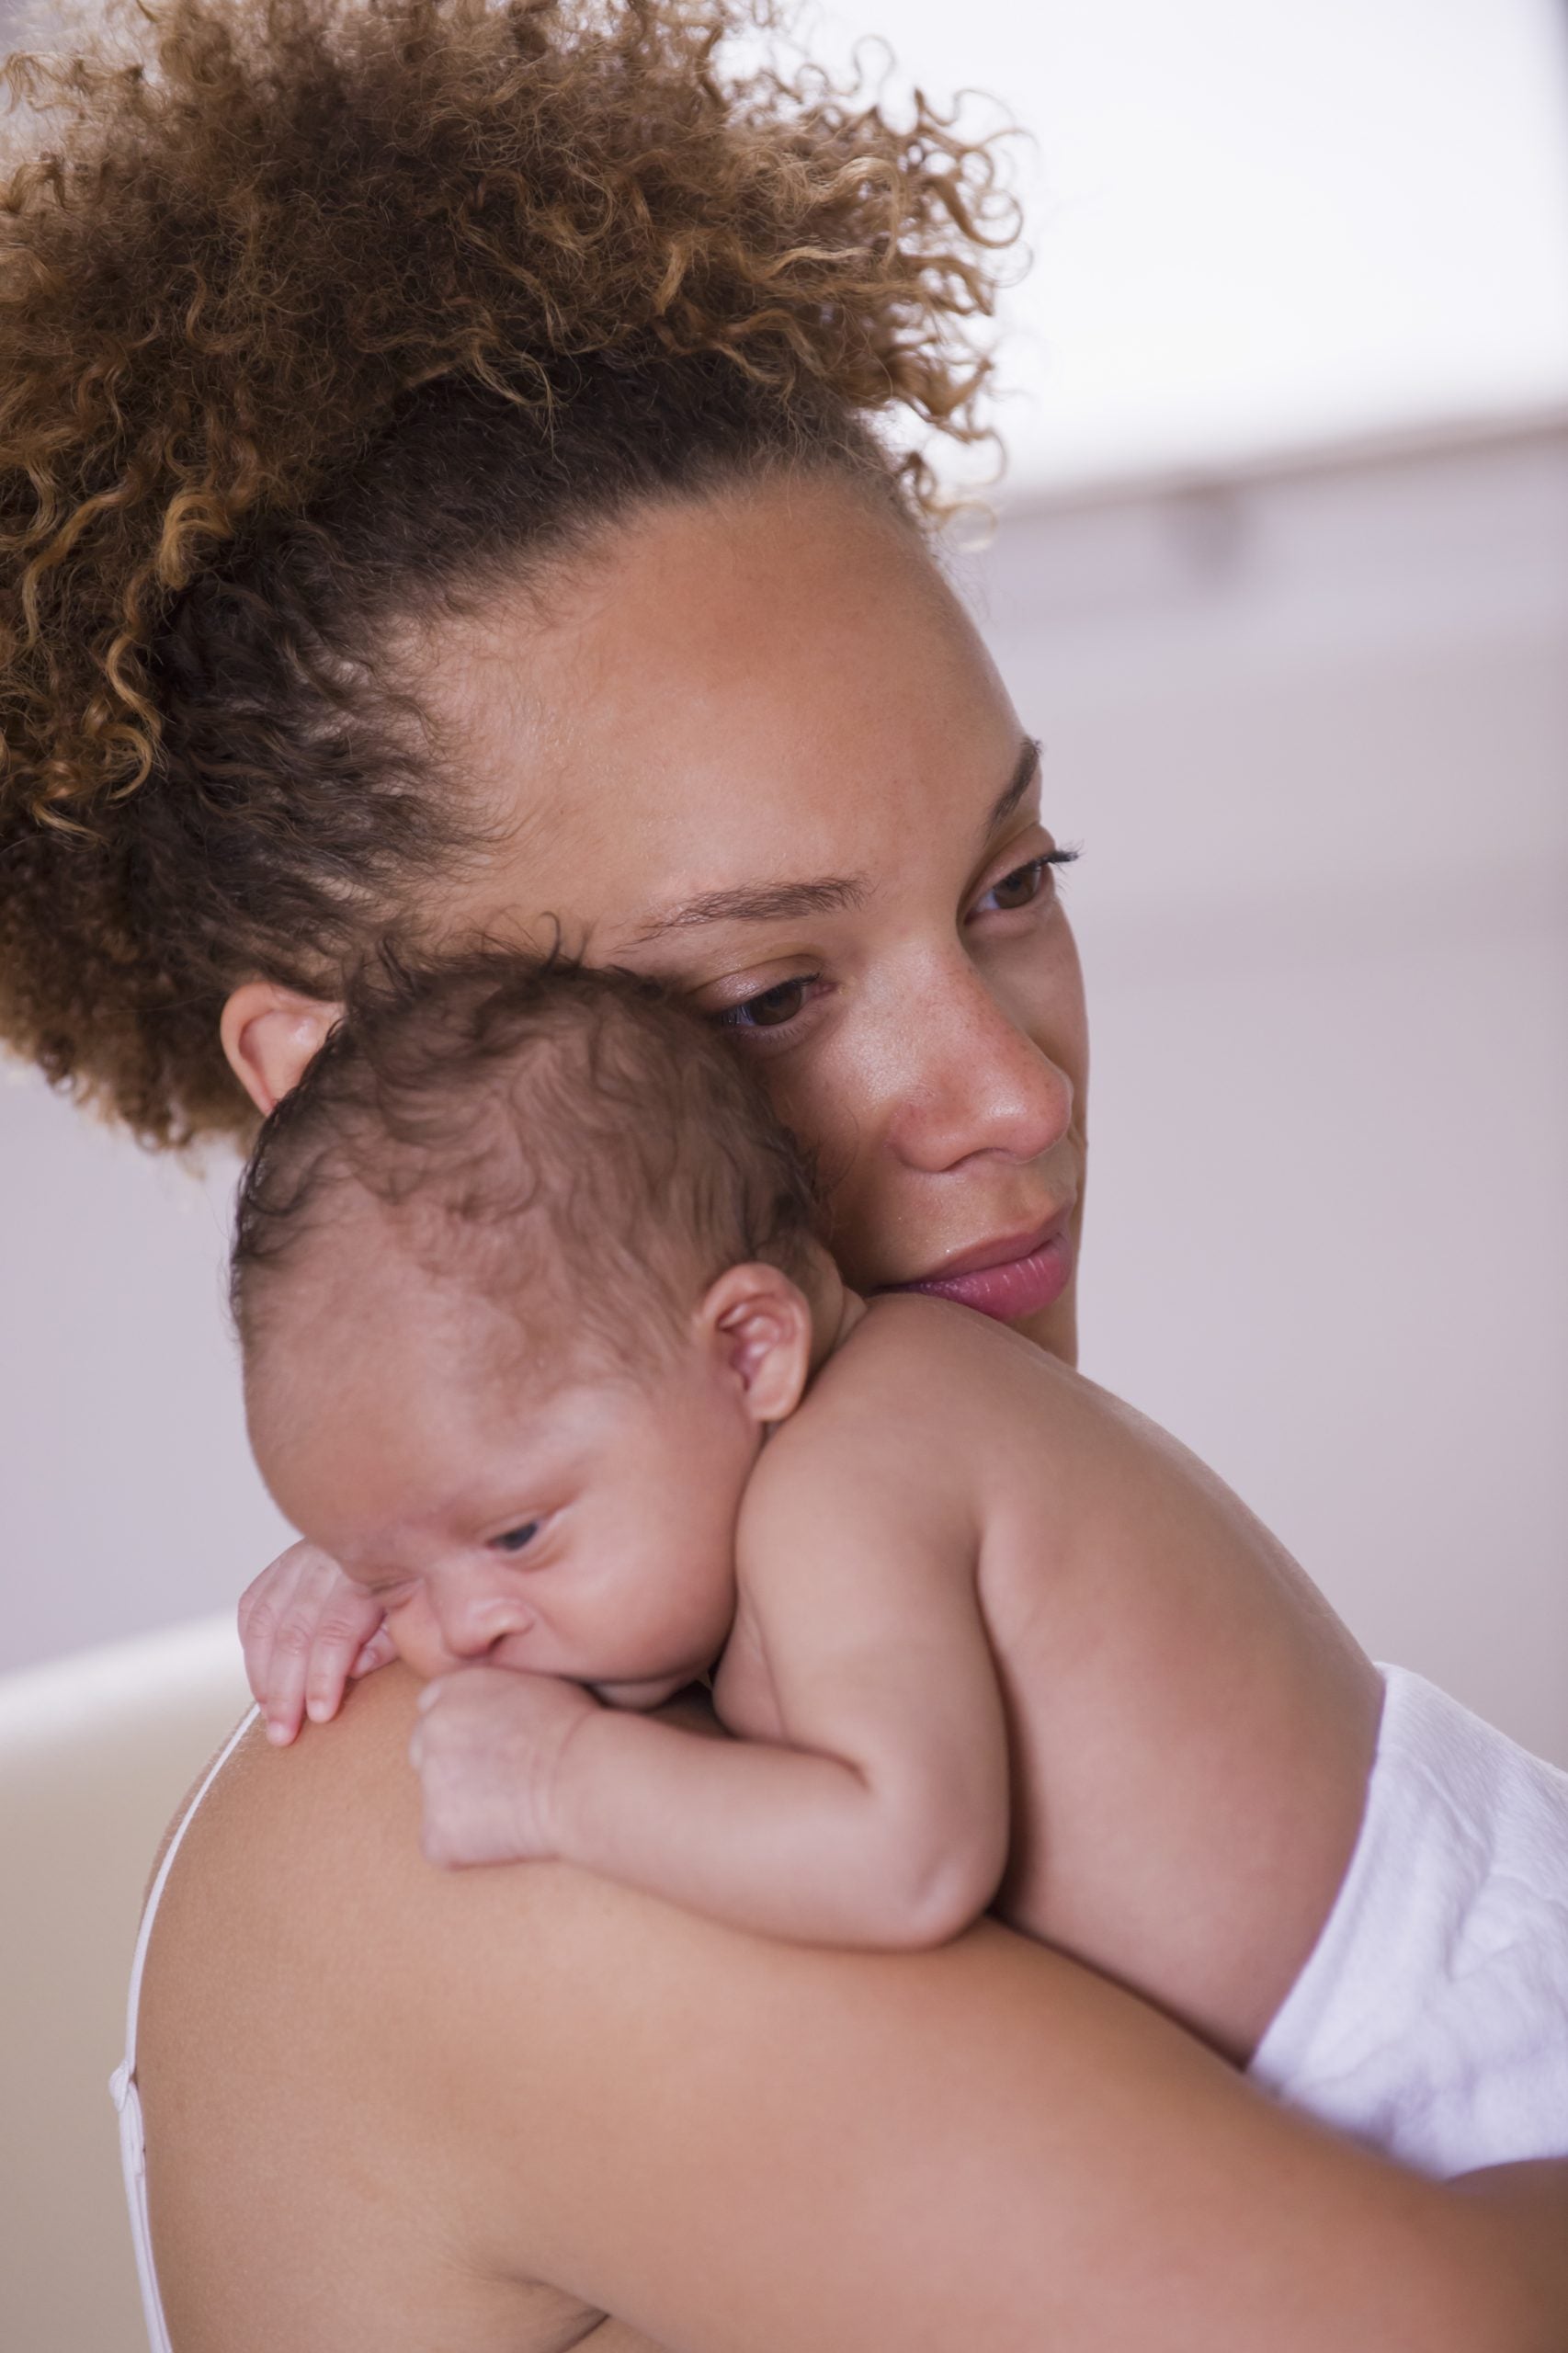 Black Maternal Health Matters! 5 Issues Facing Black Mothers Today